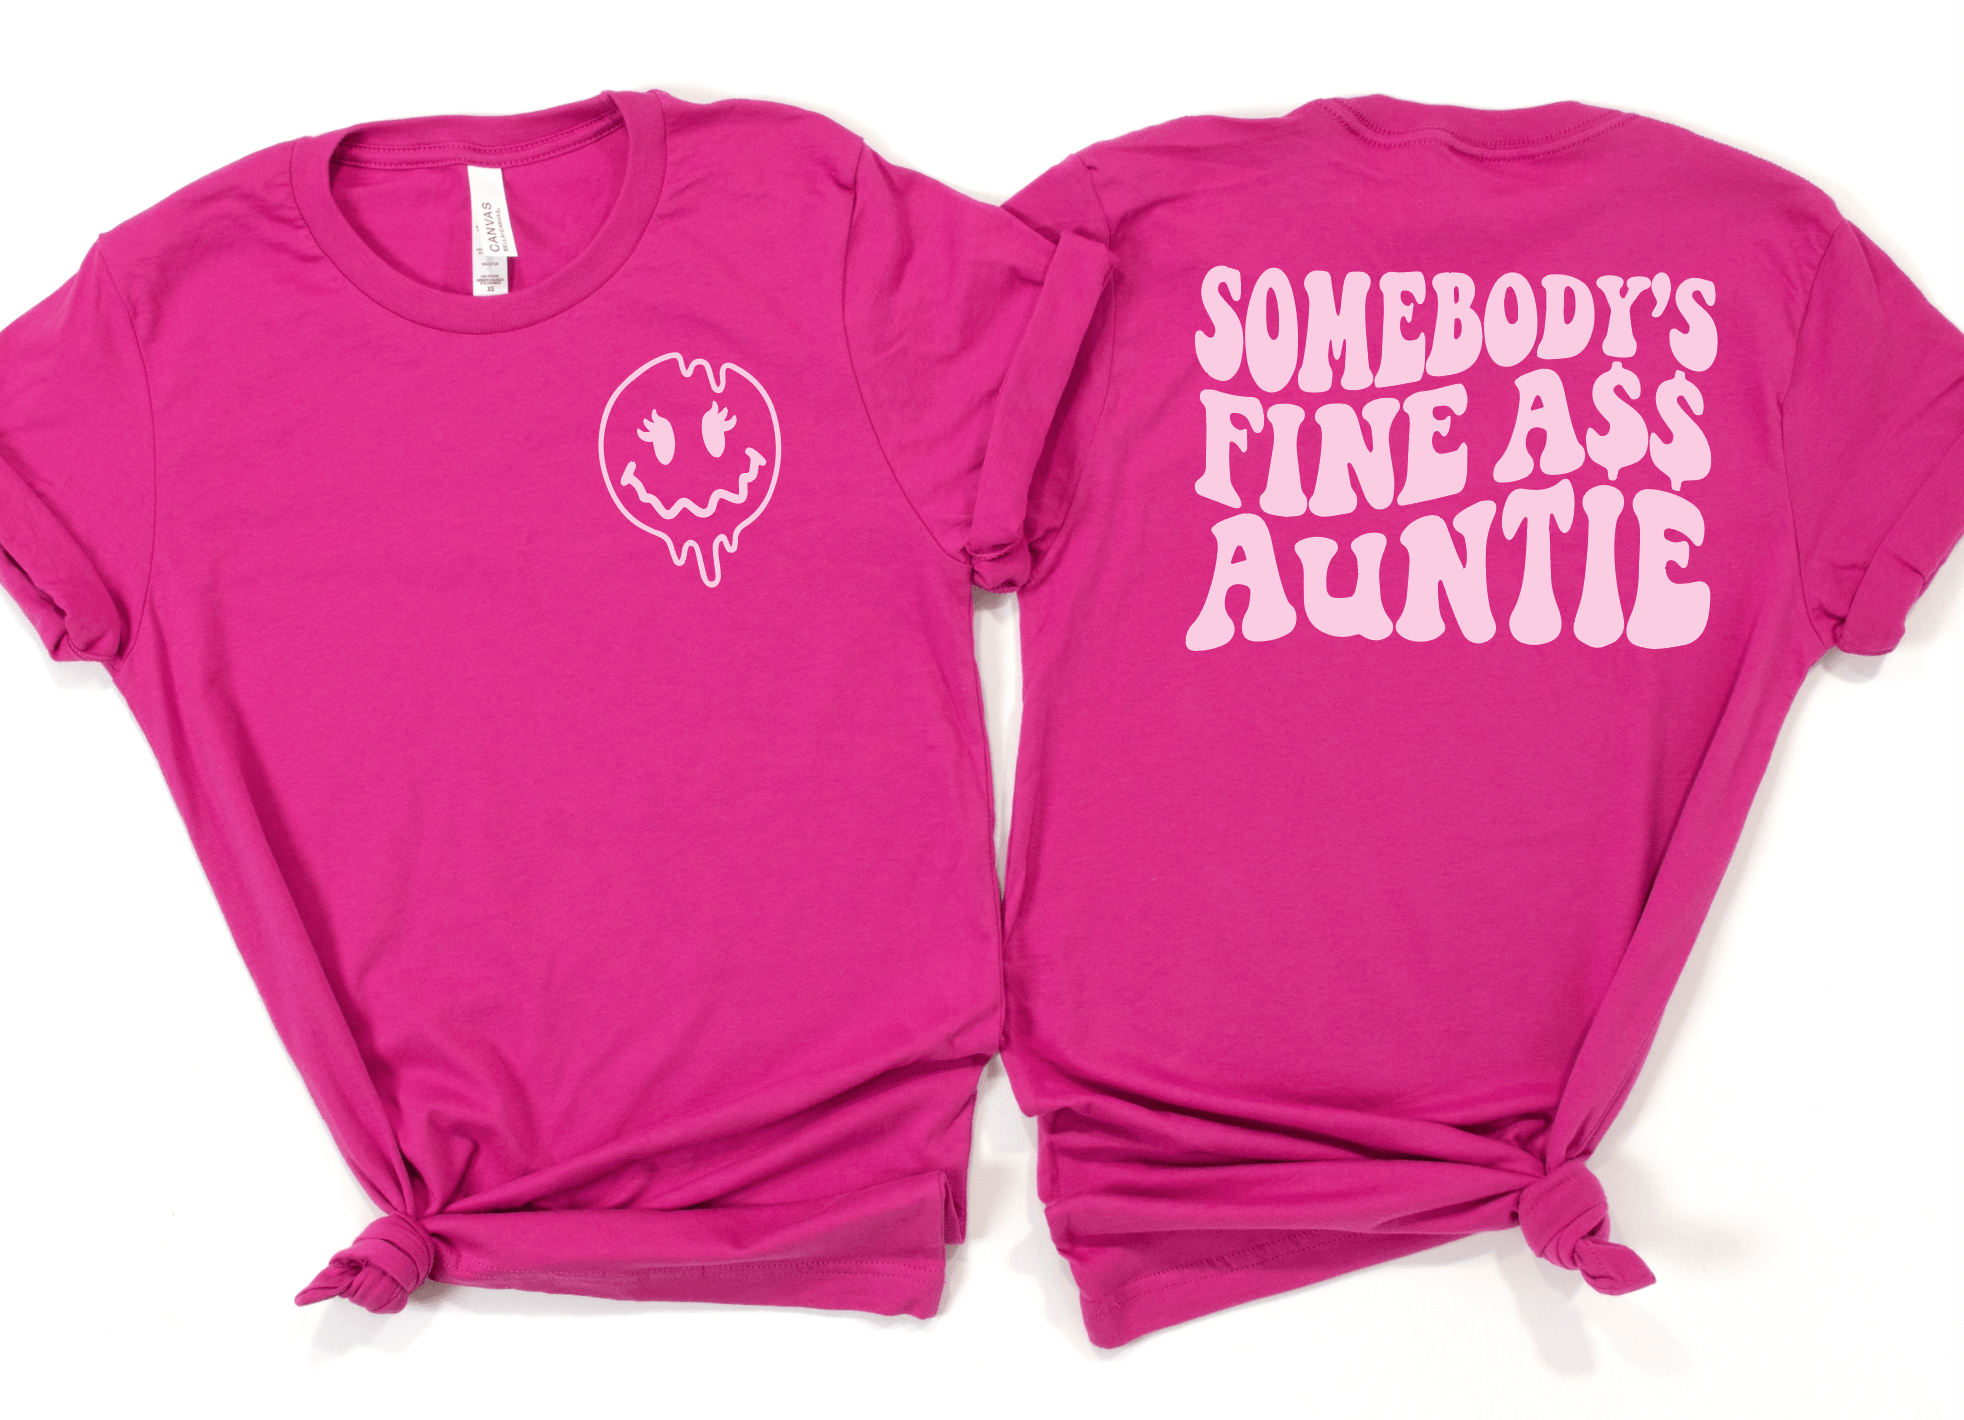 Somebody's Fine A$$ Auntie - Signastyle Boutique